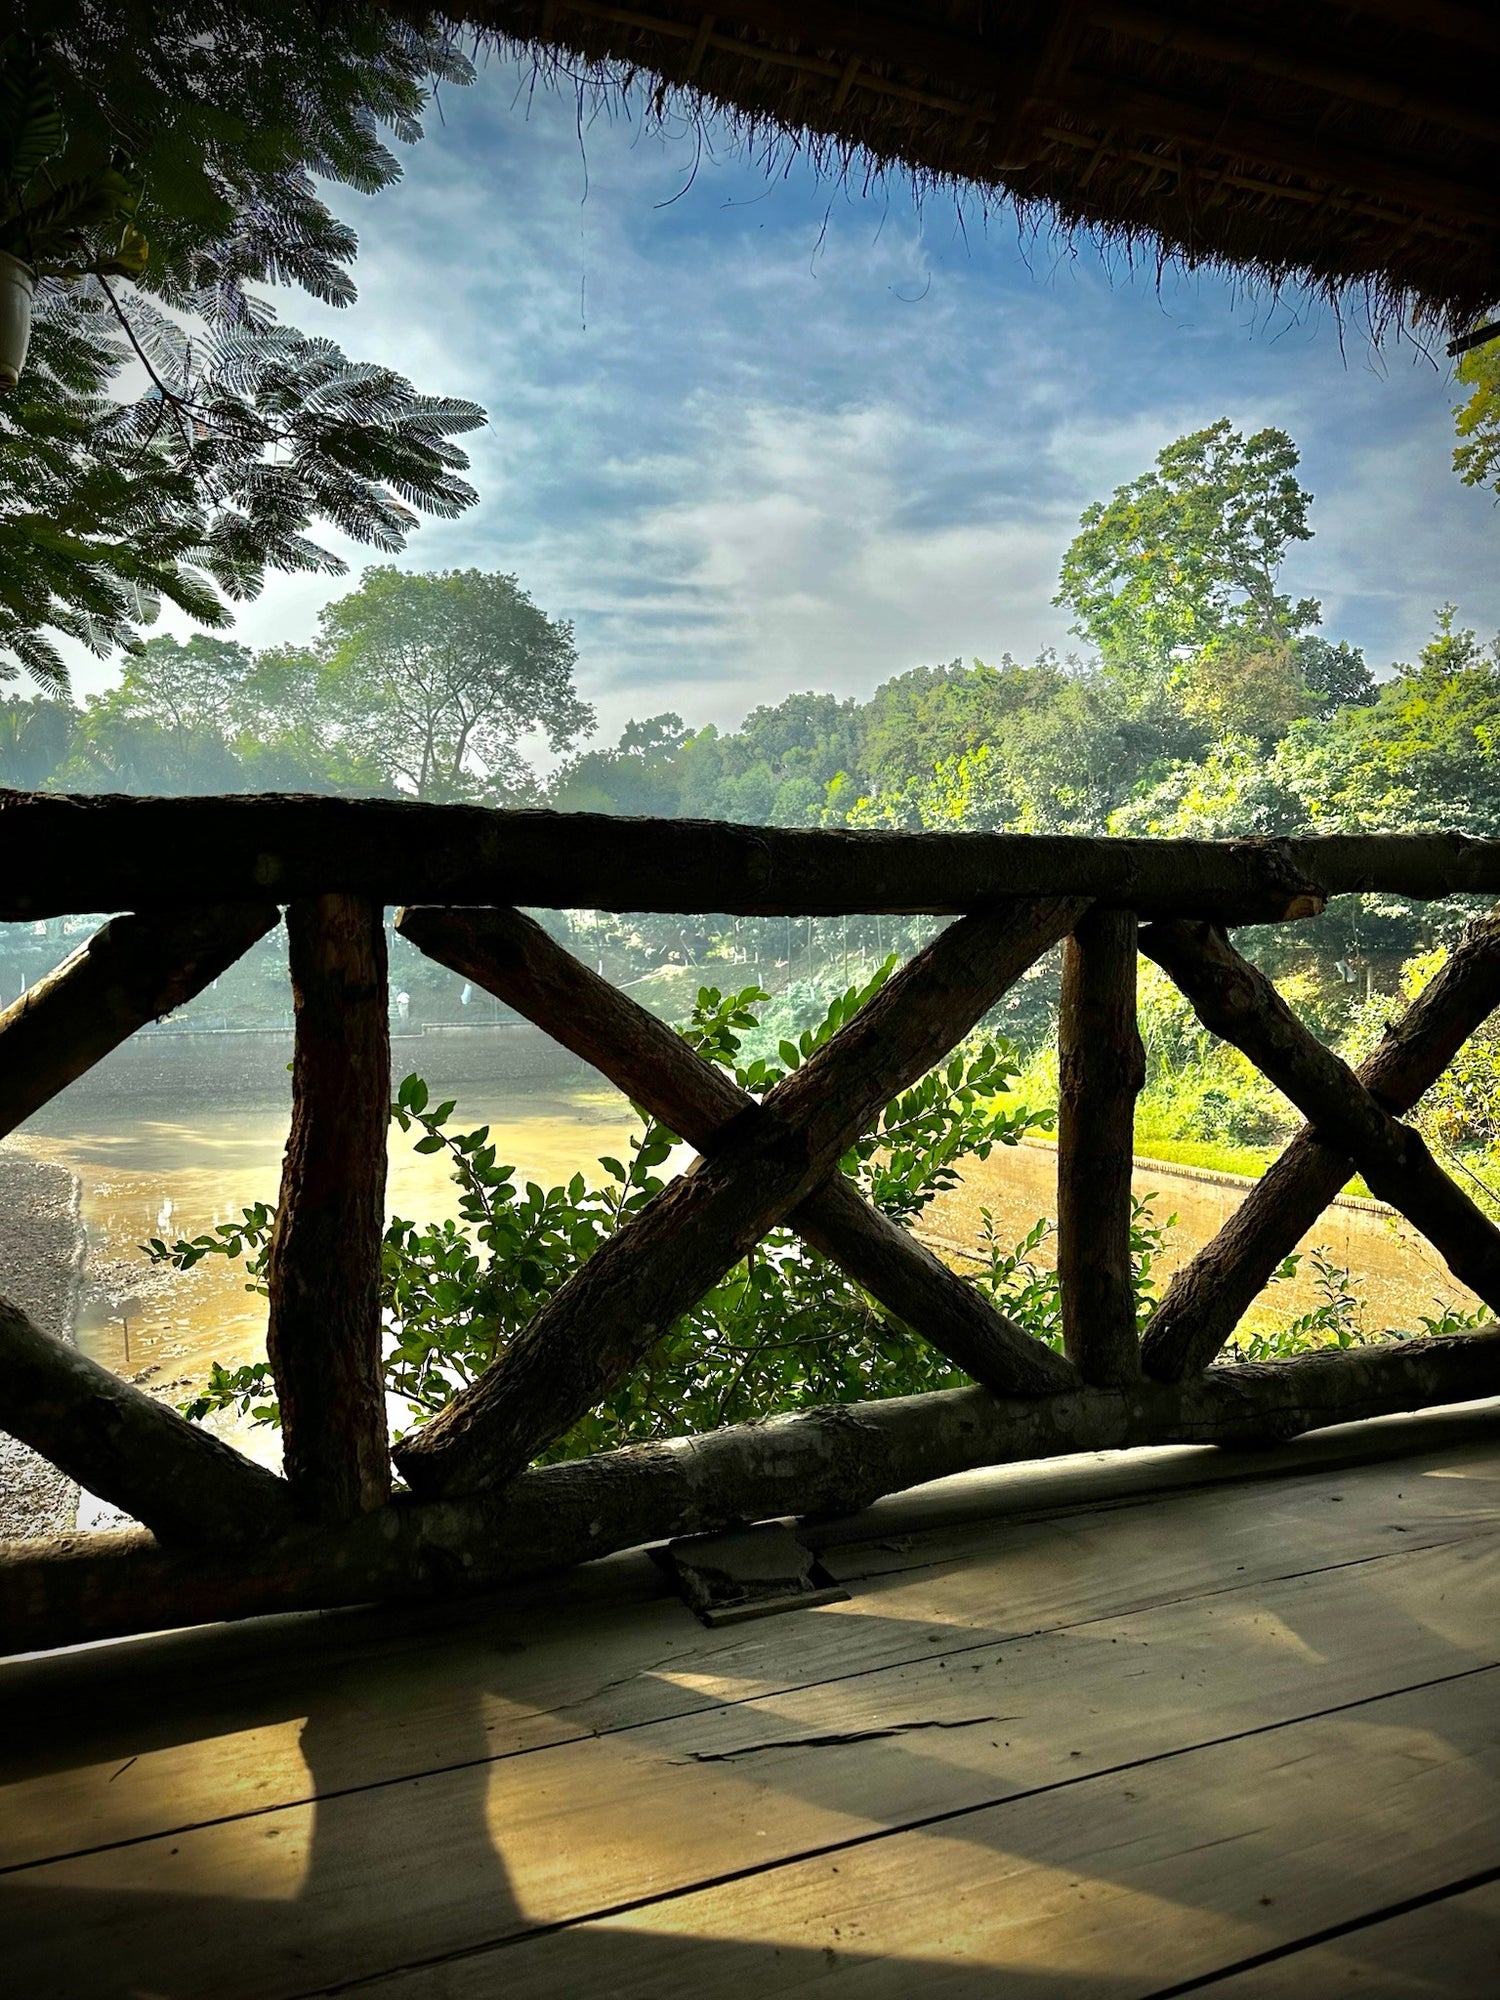 View from a rustic gazebo at Barnochata, a Dhaka hotel and resort in Savar, overlooking the serene natural landscape and water.